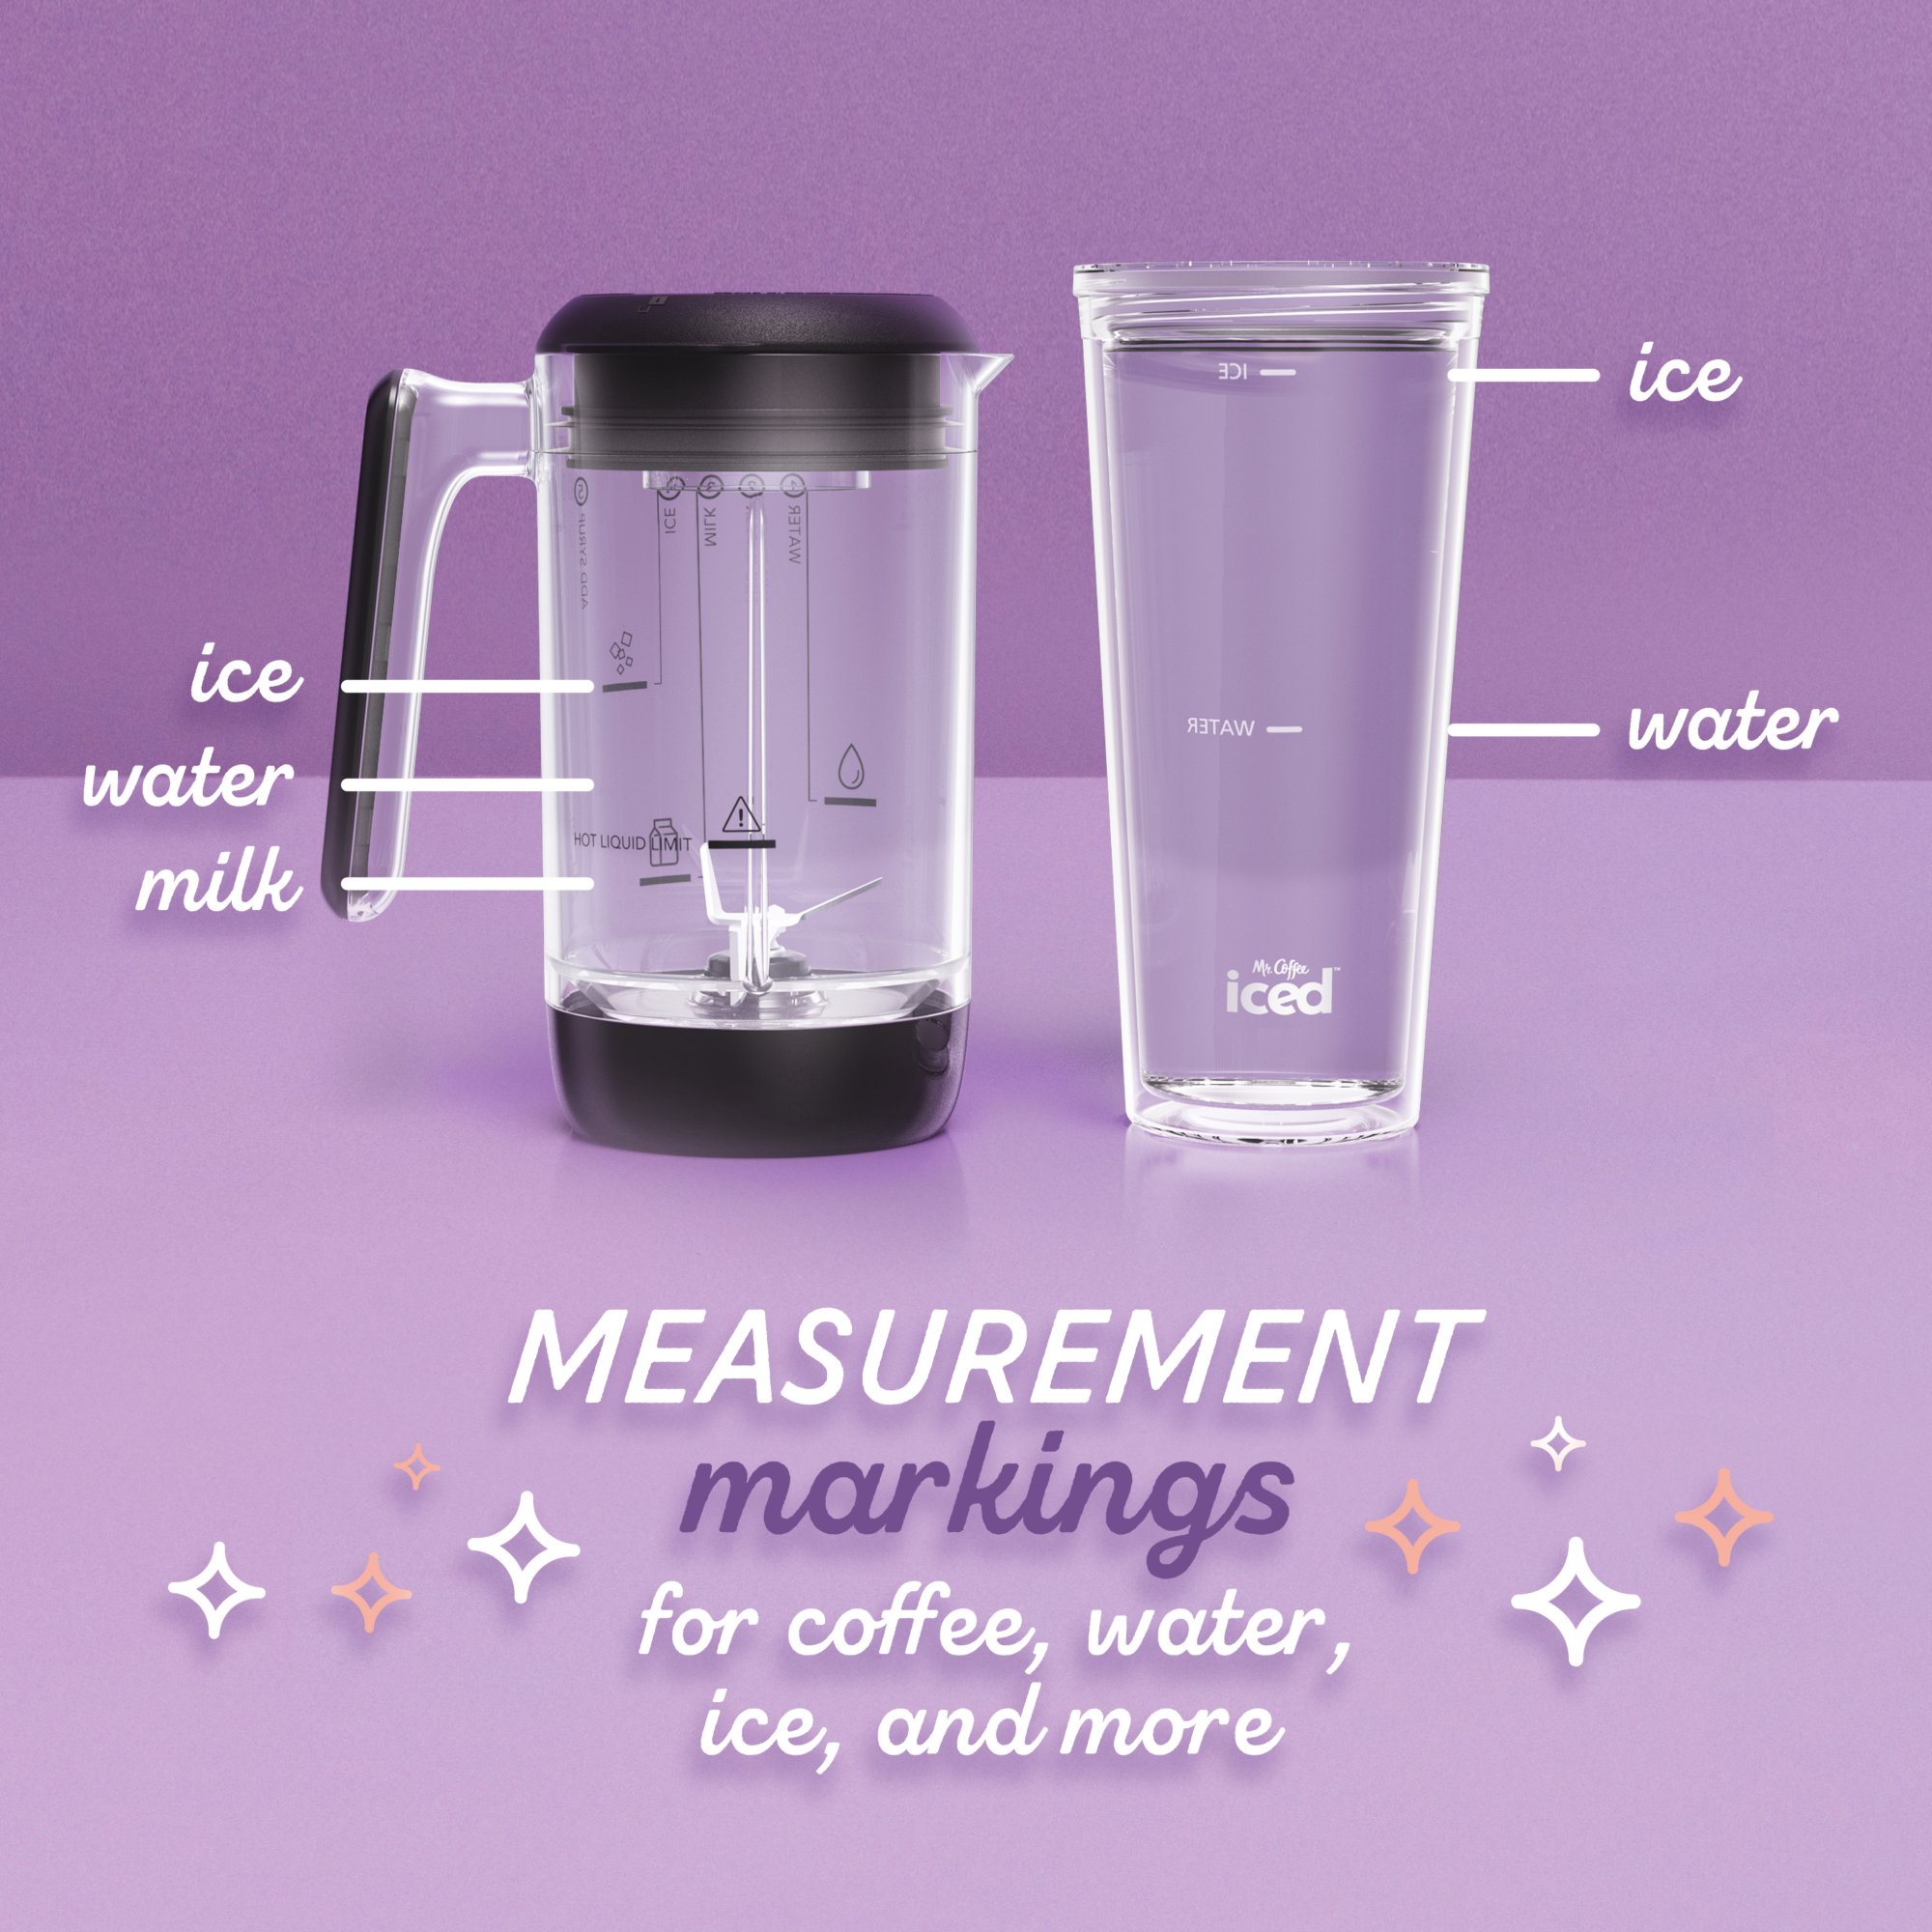 Mr. Coffee Cafe Frappe Maker Automatic Frozen Coffee Drink Machine